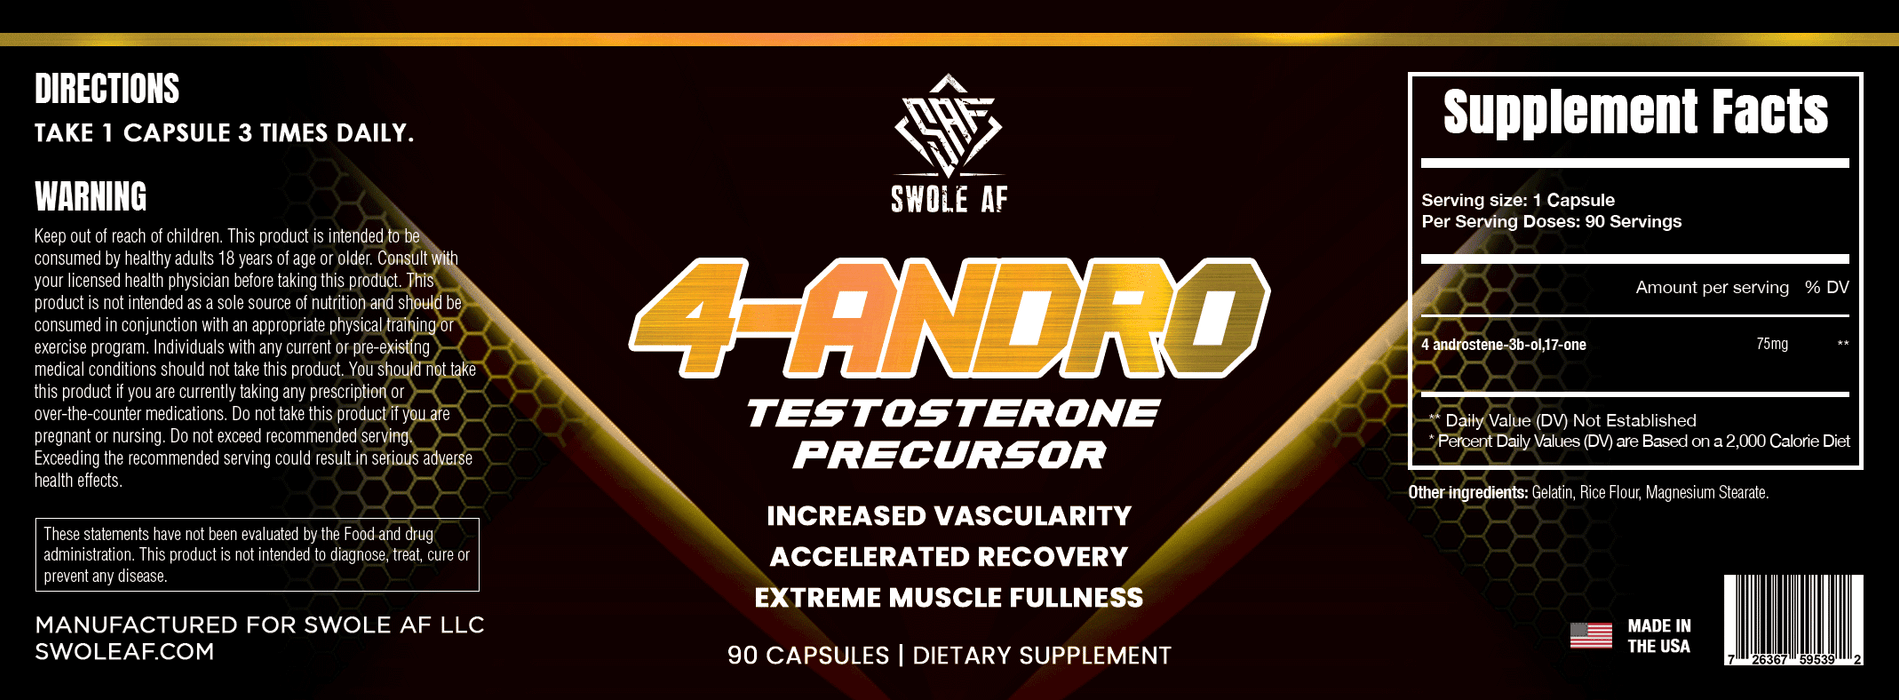 swole af 4-andro ingredients label